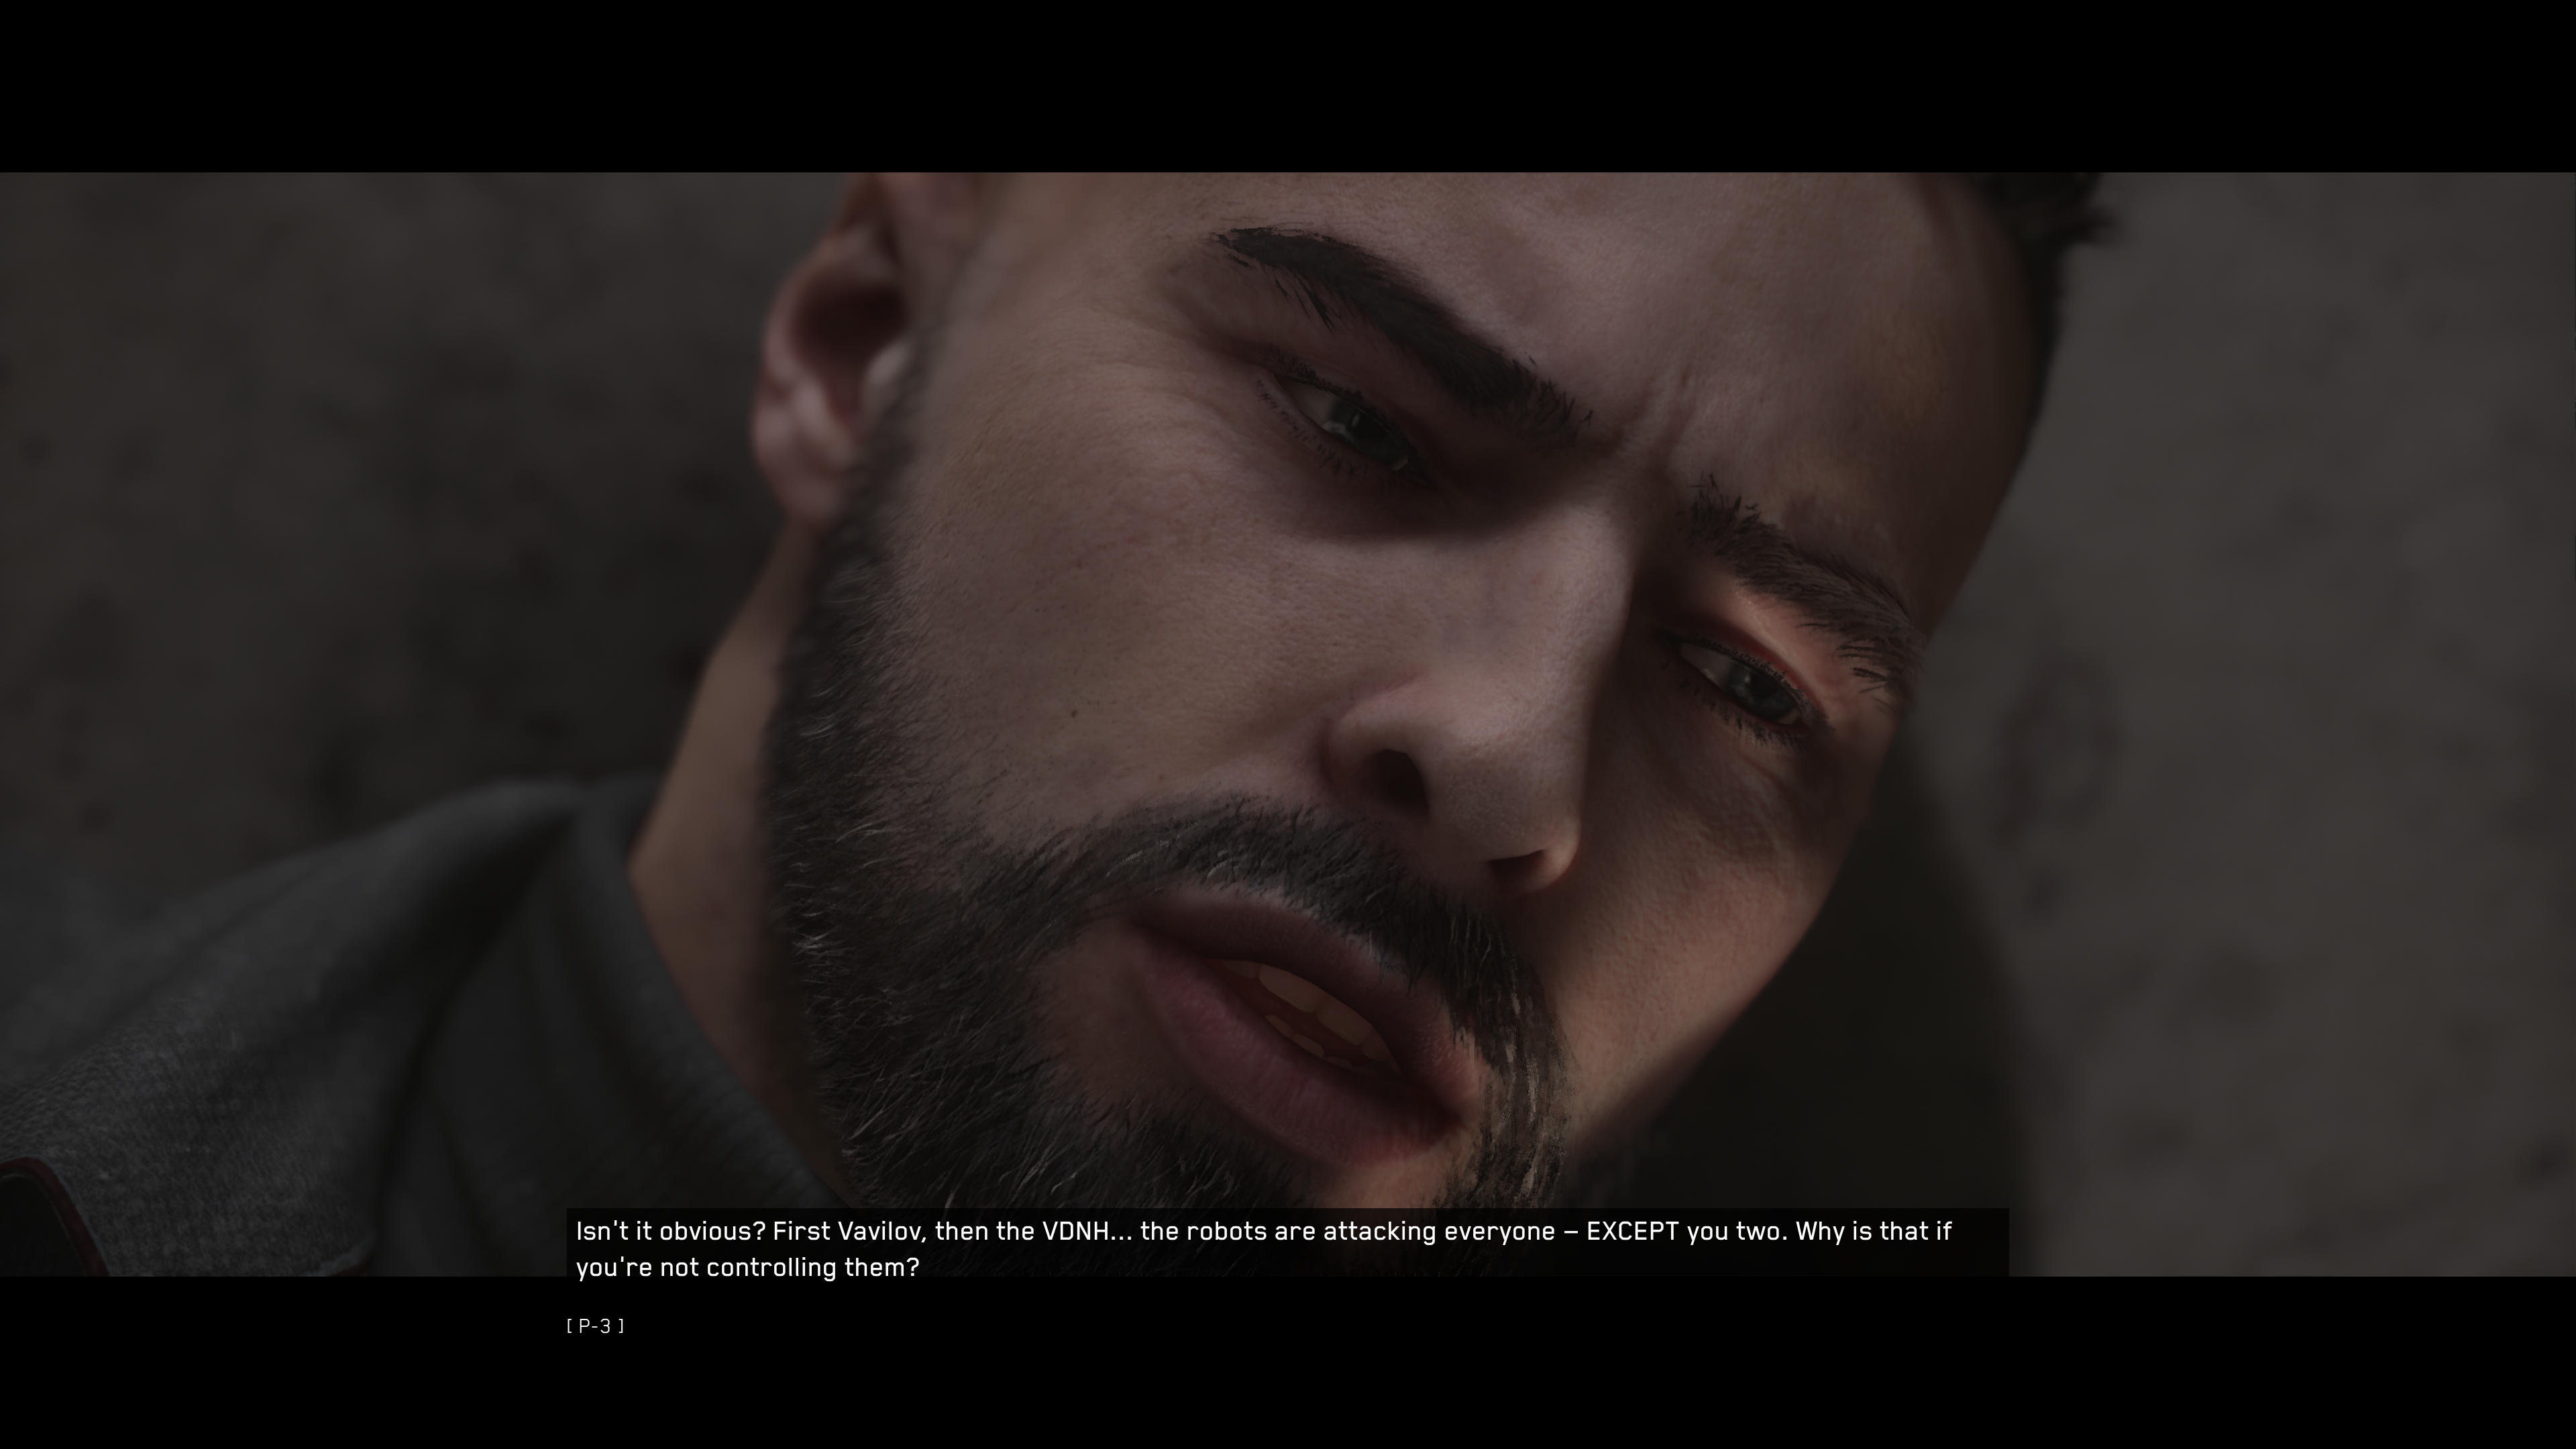 Atomic Heart review - P-3's face looking confused as his glove, Charles, explains things to him